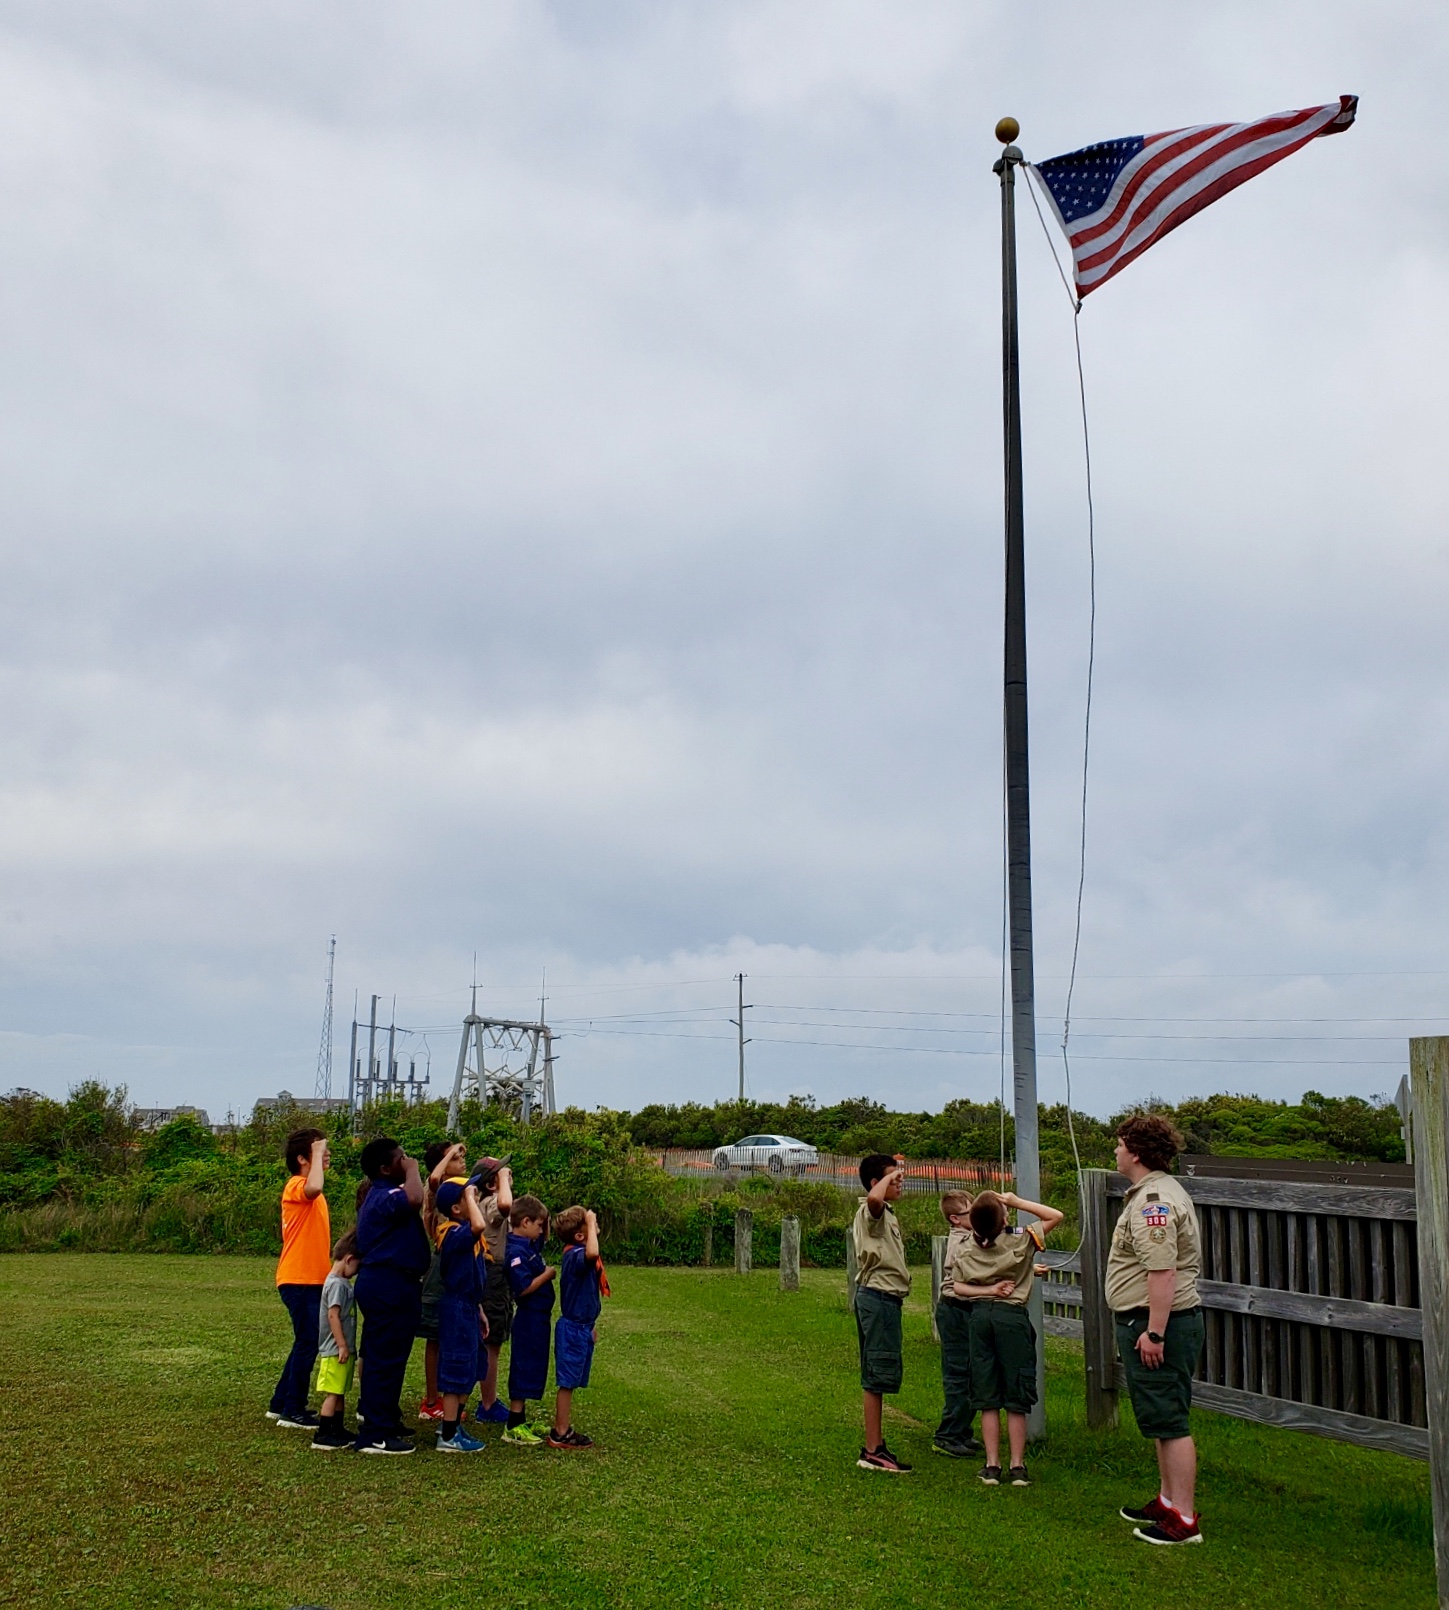 Troop 308 from Cleveland, NC raising the flag at Oregon Inlet Campground